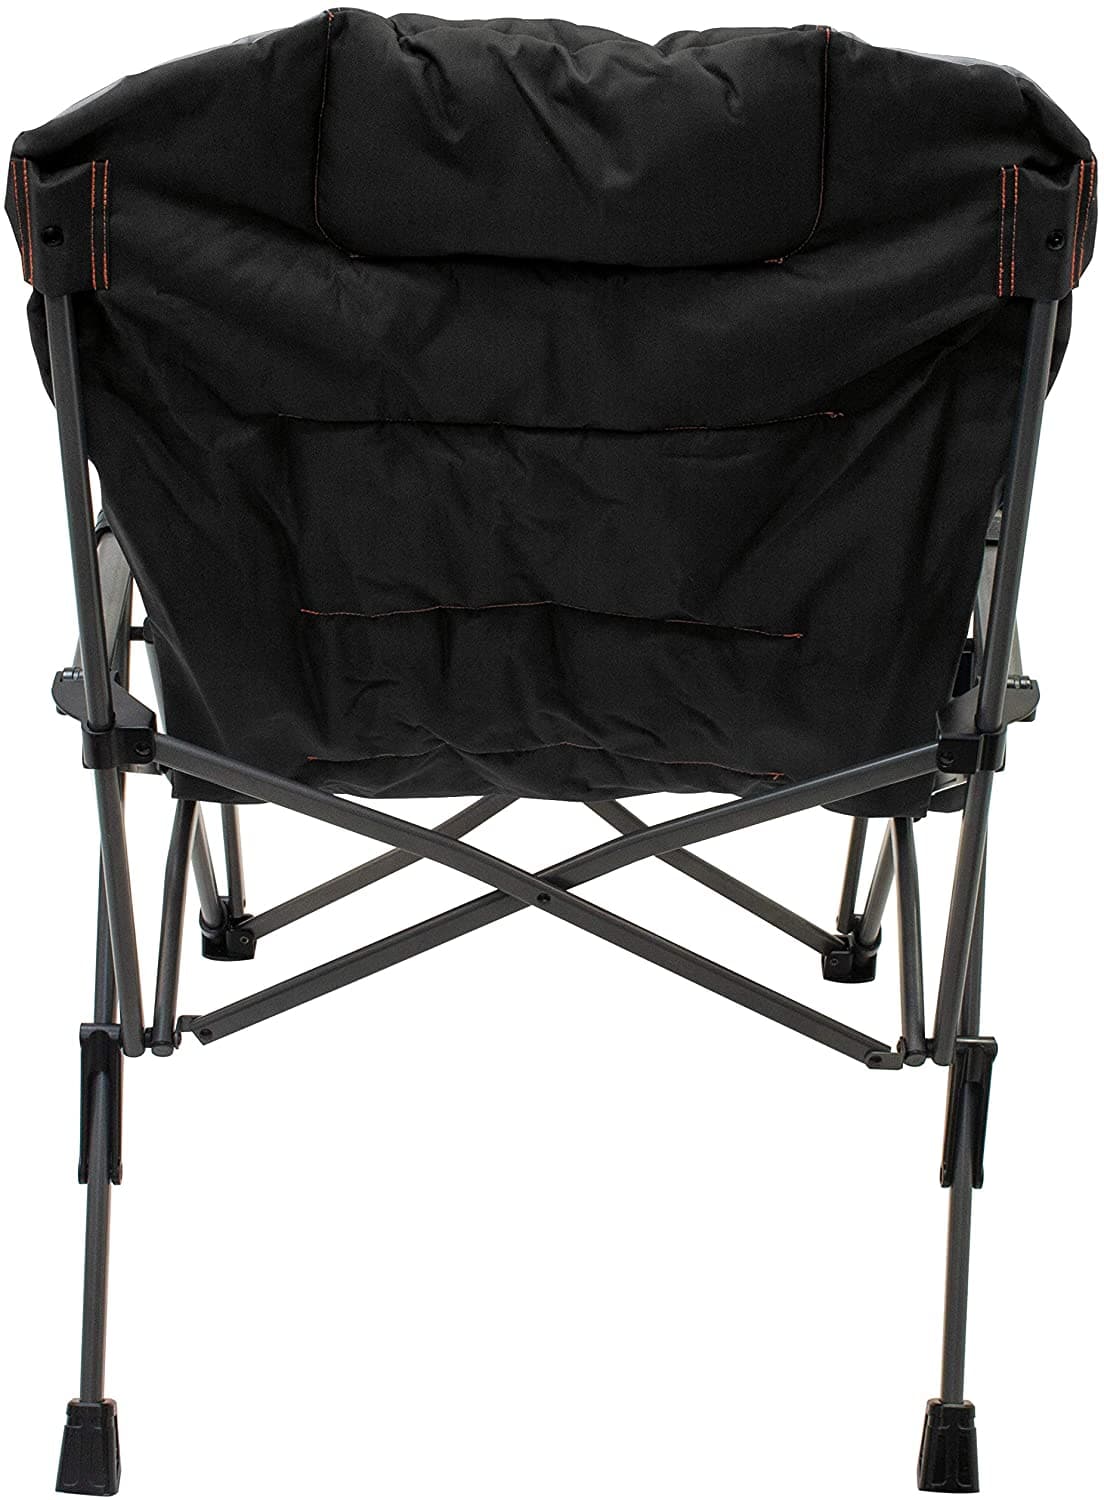 RIO Gear Deluxe Hard Arm Quad Folding Camp Chair - Charcoal/Black - Senior.com Outdoor Chairs